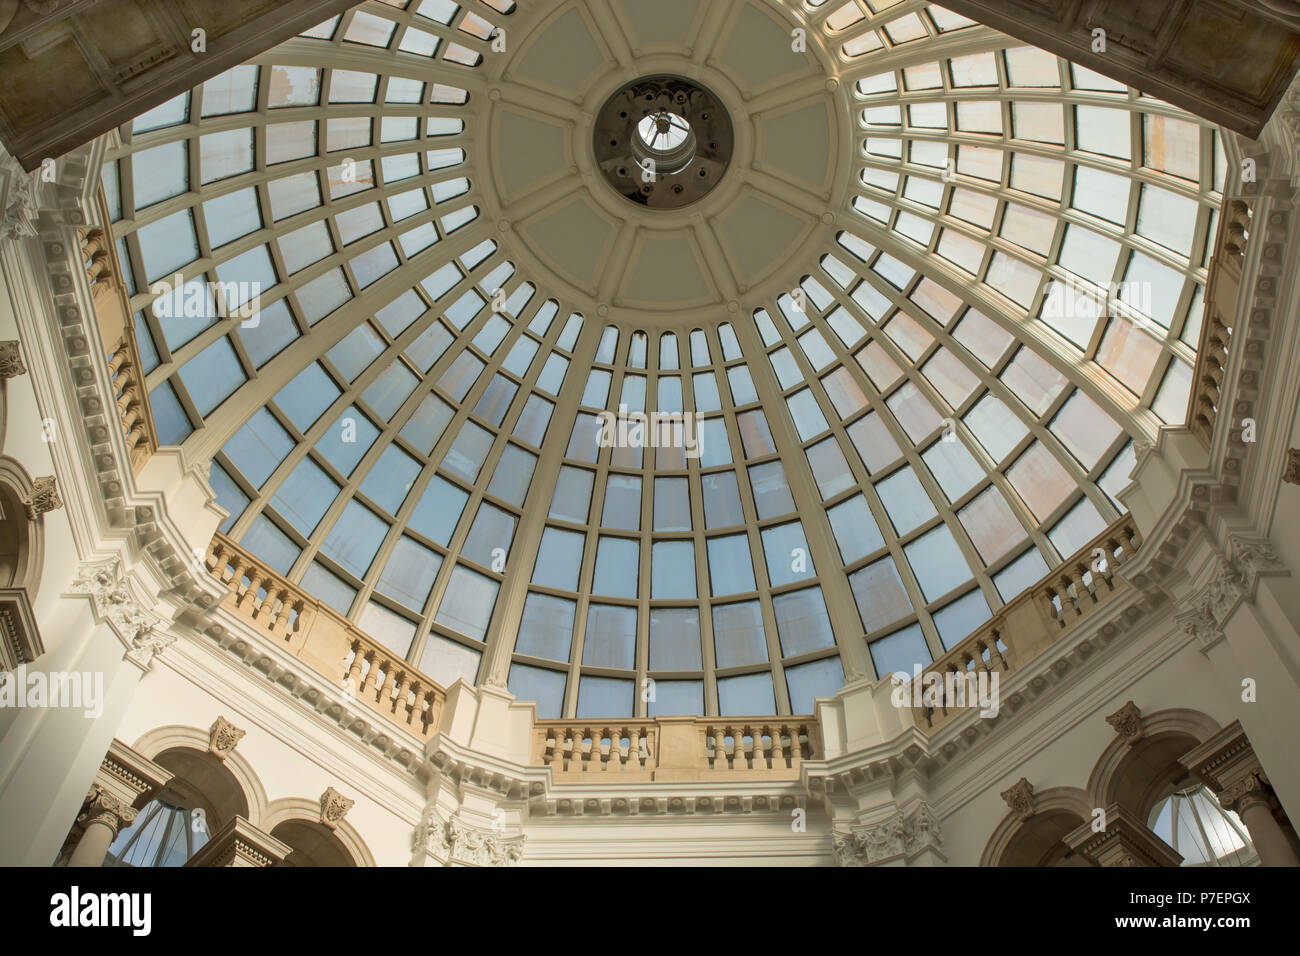 Interior view looking up into glass dome roof of the Tate Gallery at Millbank, London, England Stock Photo